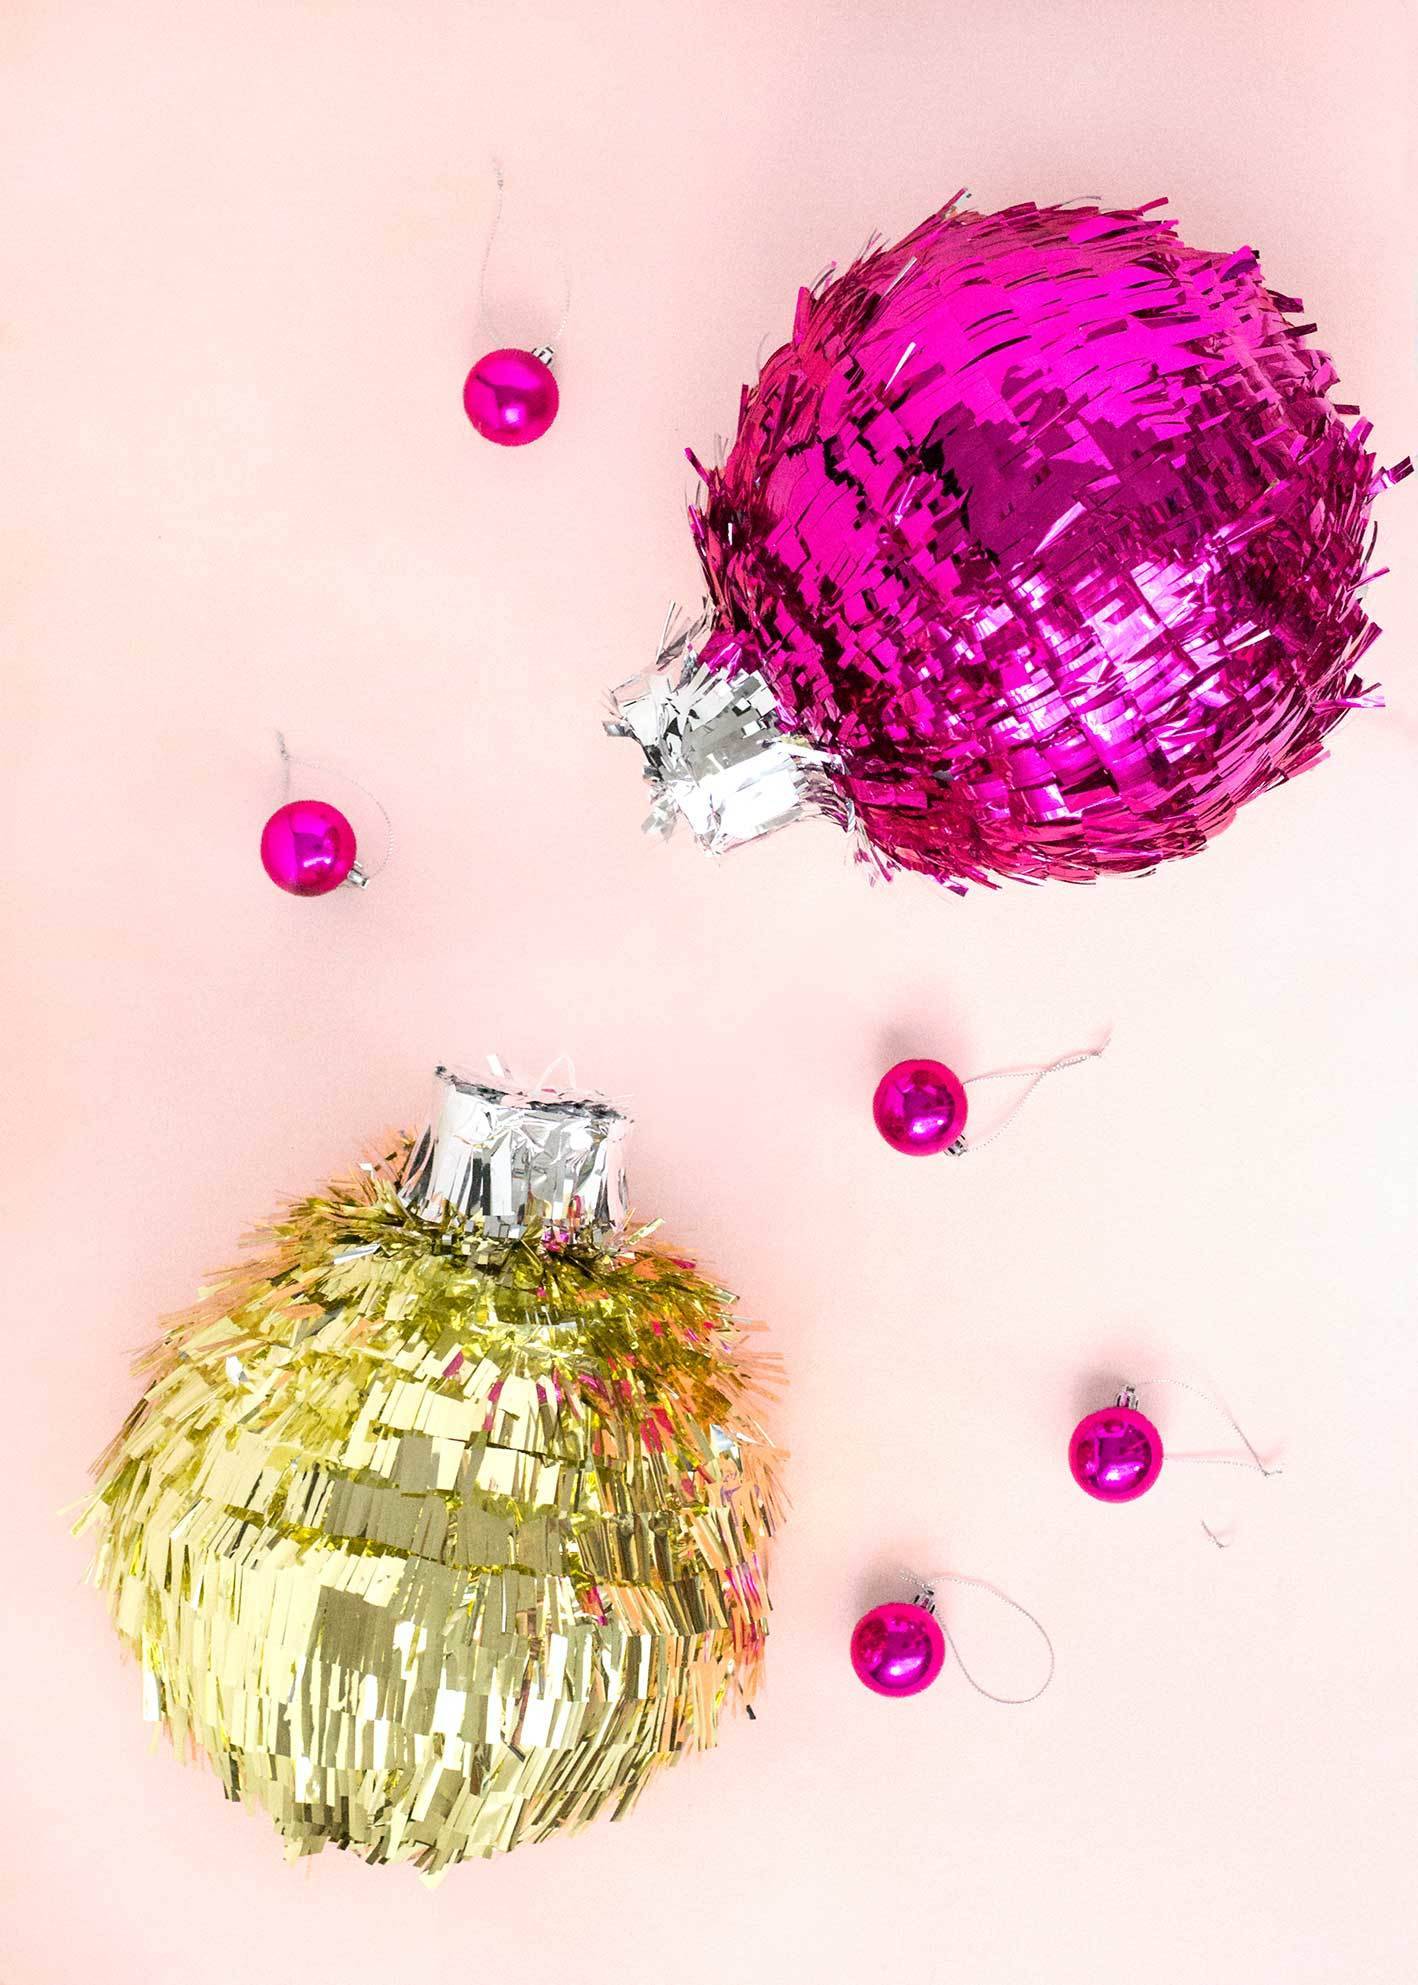 Get ready for Christmas with this festive bauble pinata!